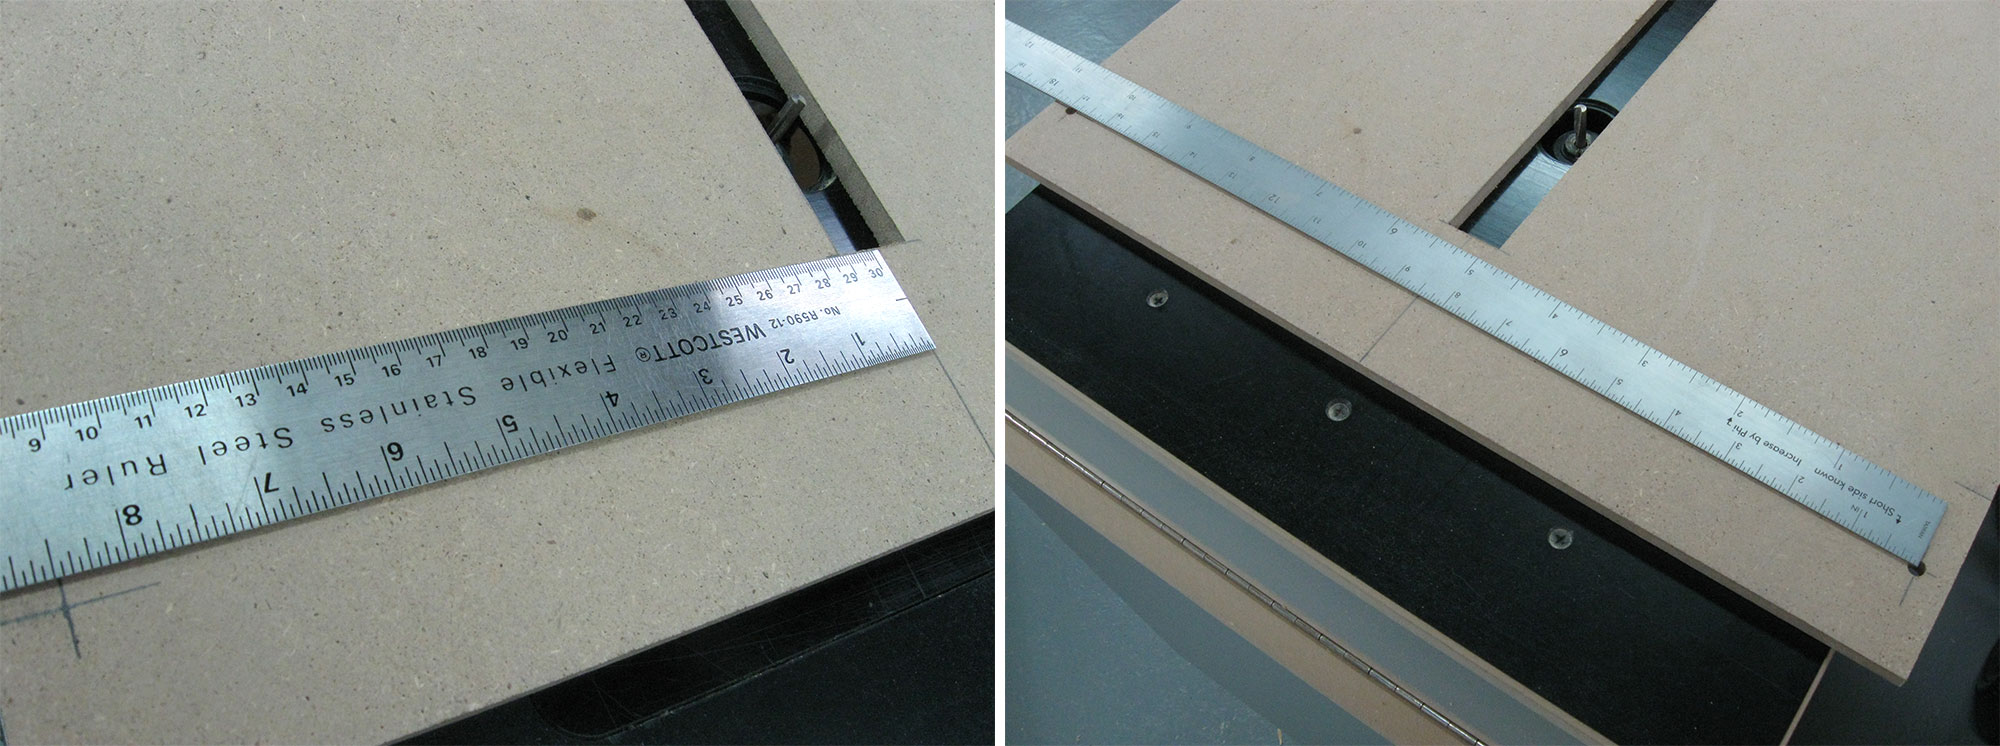 Left: Marking the position of the second pivot point. Right: Marking start/stop points of arced slots.